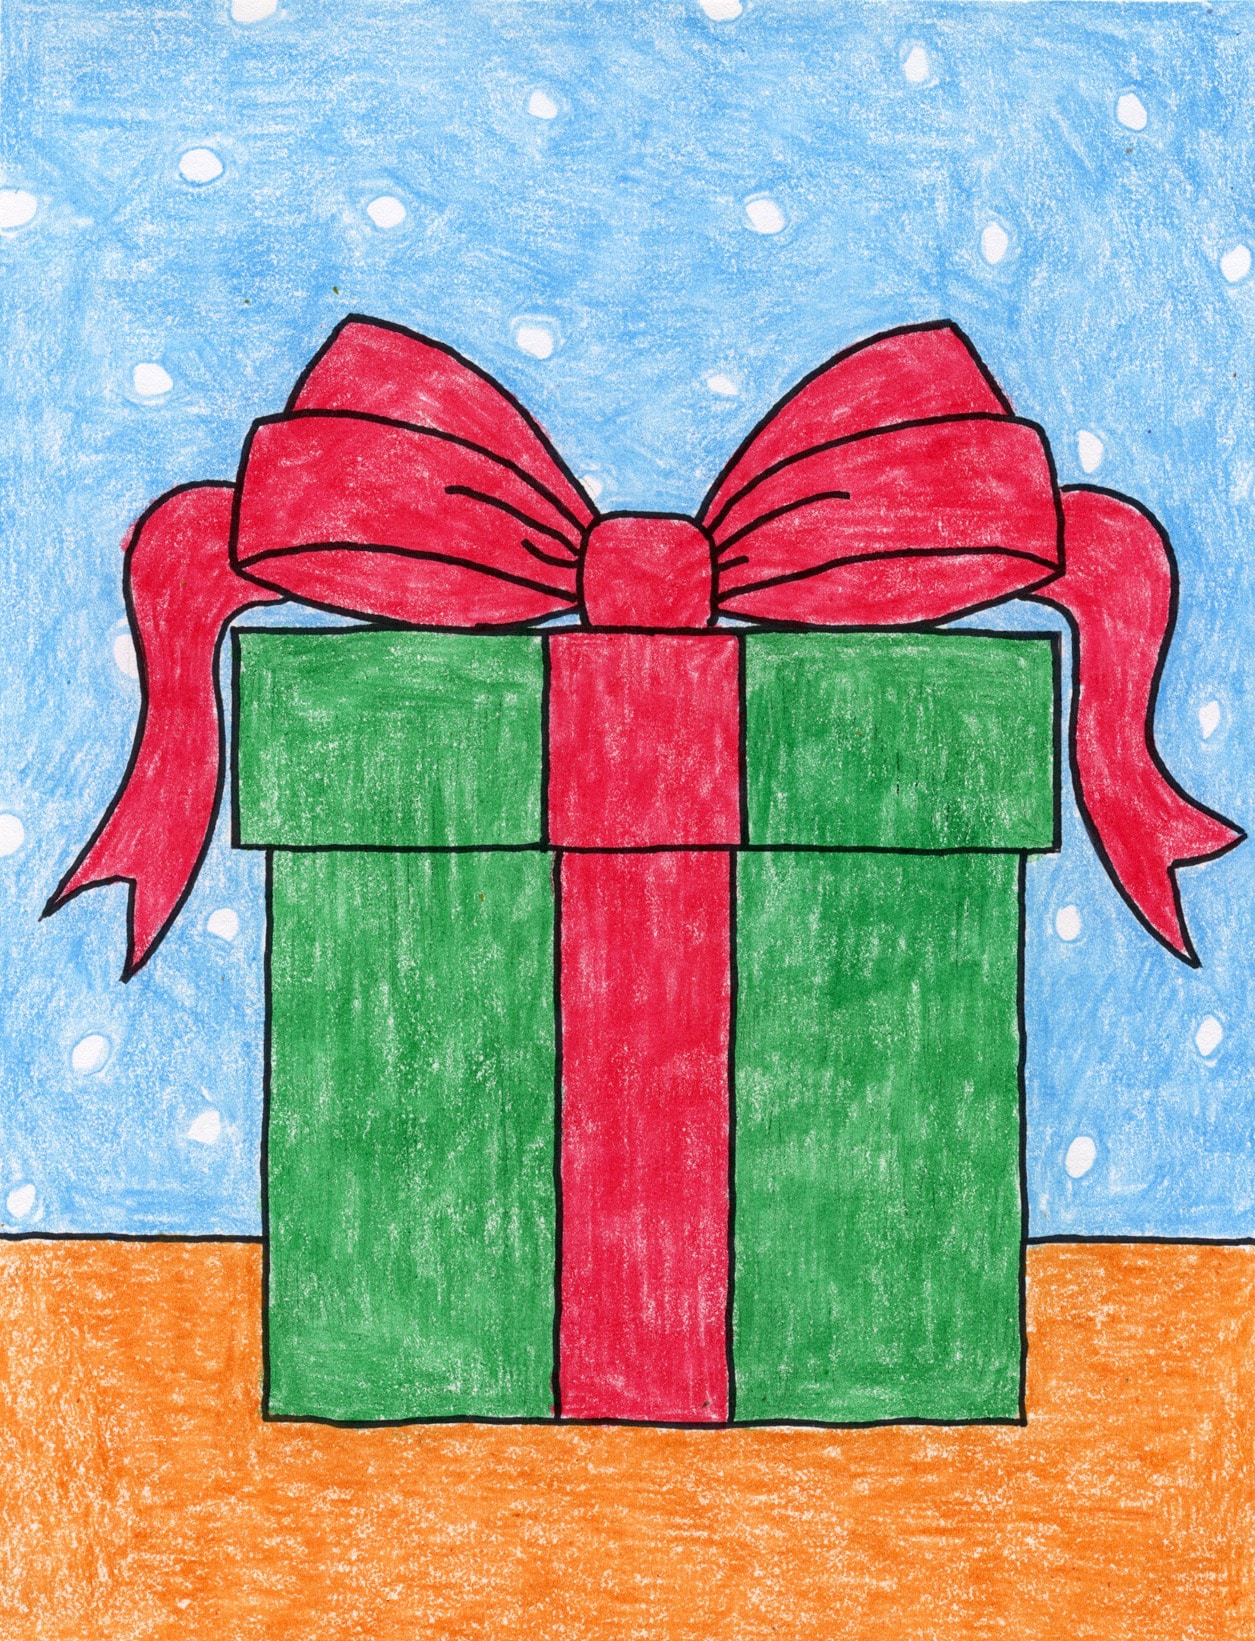 How to Draw Christmas Presents - DrawingNow